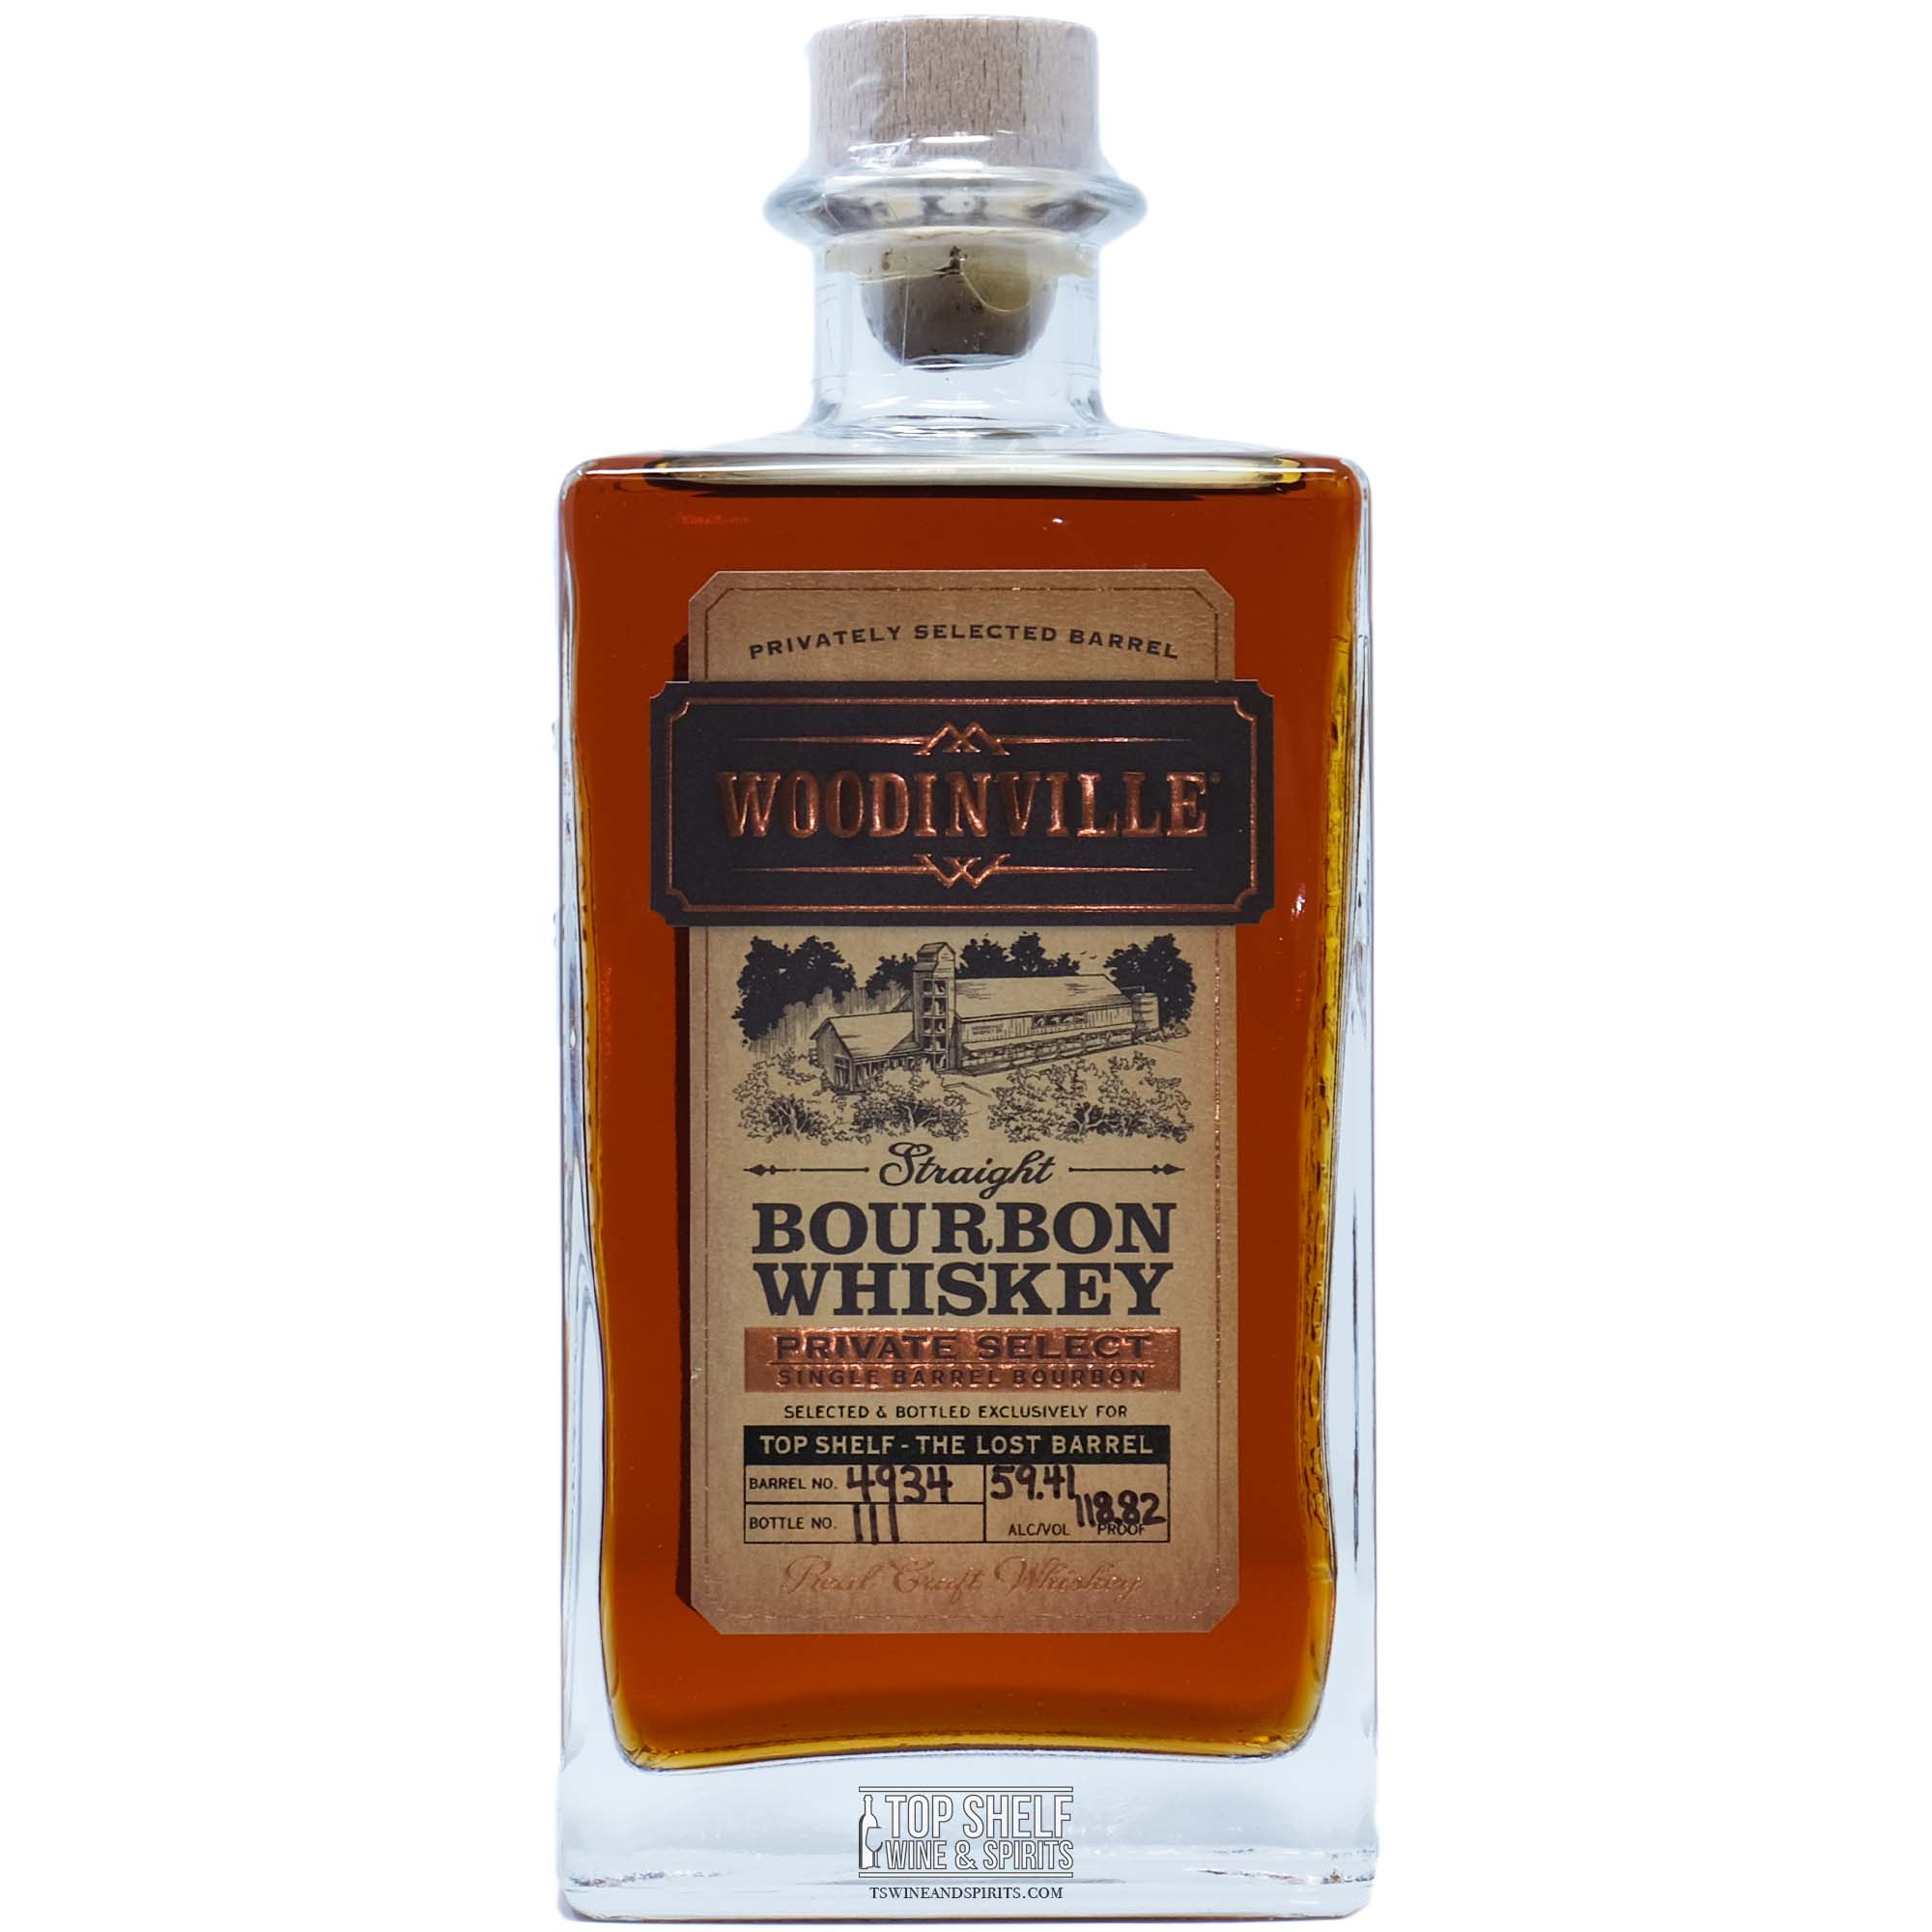 Woodinville 6 Year Bourbon “The Lost Barrel” Cask Strength (Private Selection)